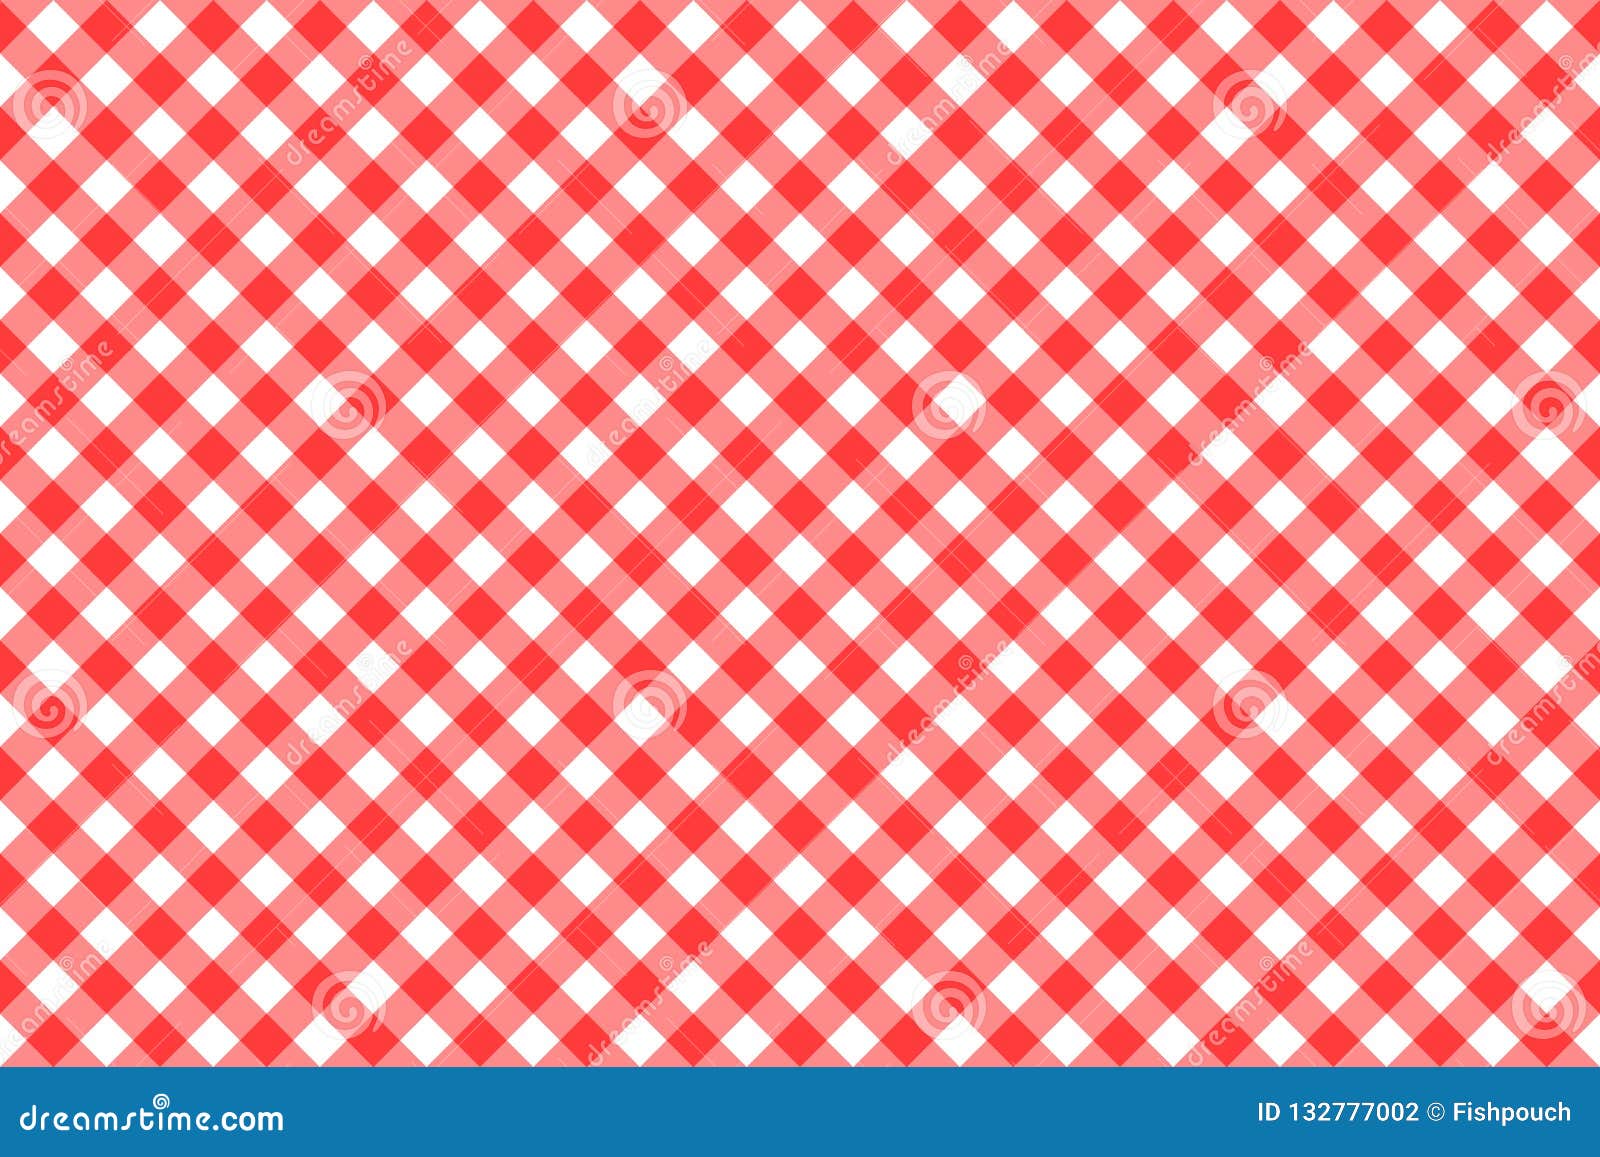 Gingham Red Checkered Seamless Pattern. Plaid Repeat Design Background.  Stock Vector - Illustration of fabric, repeat: 132777002